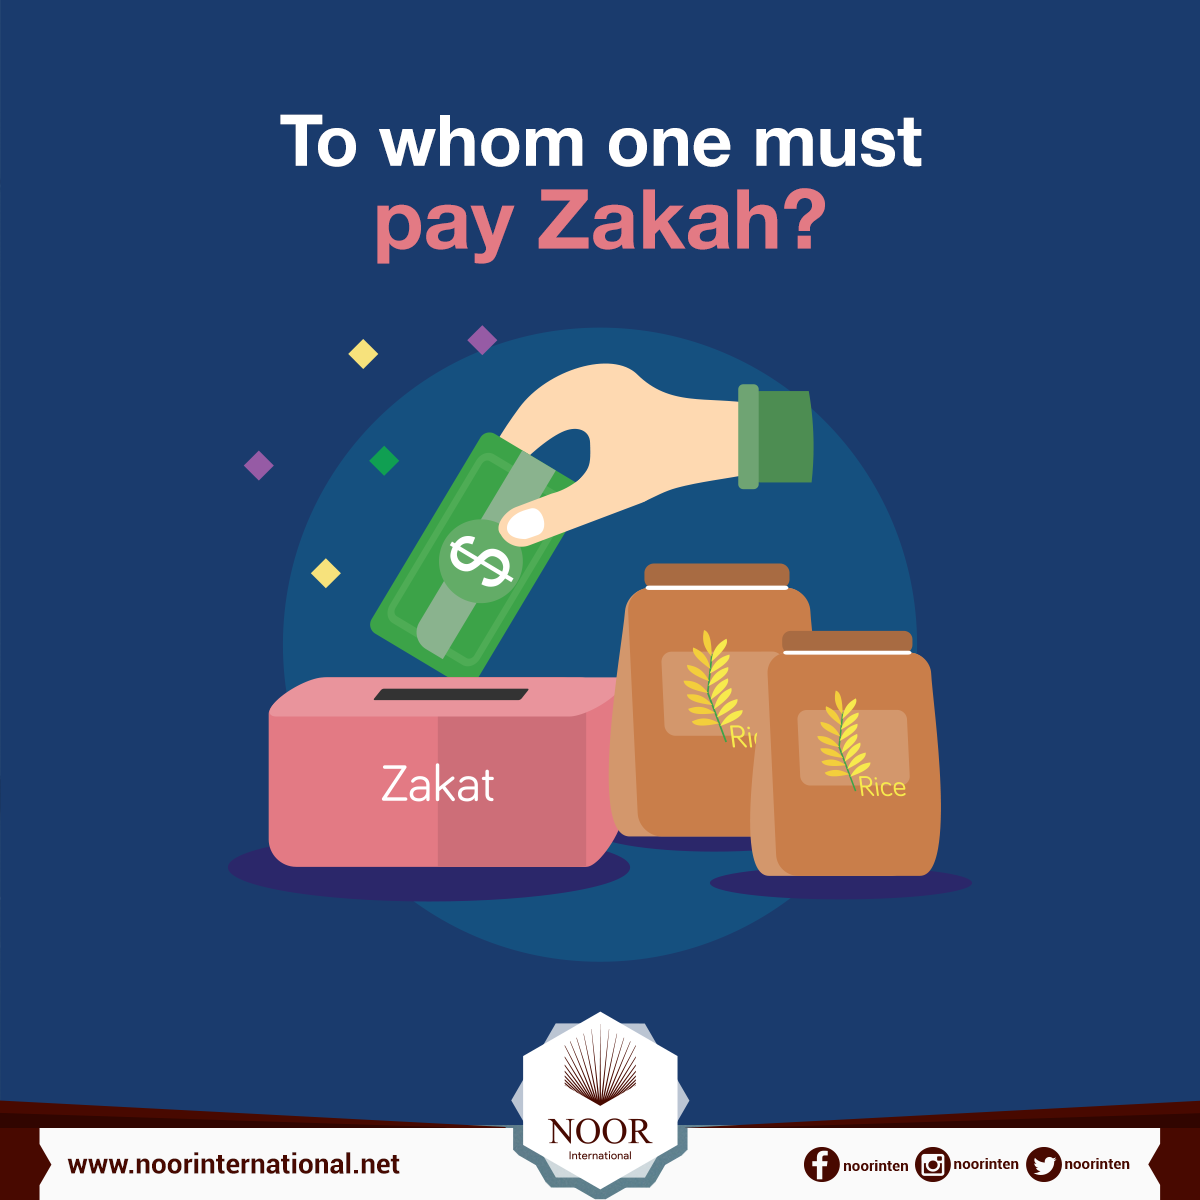 To whom one must pay Zakah?